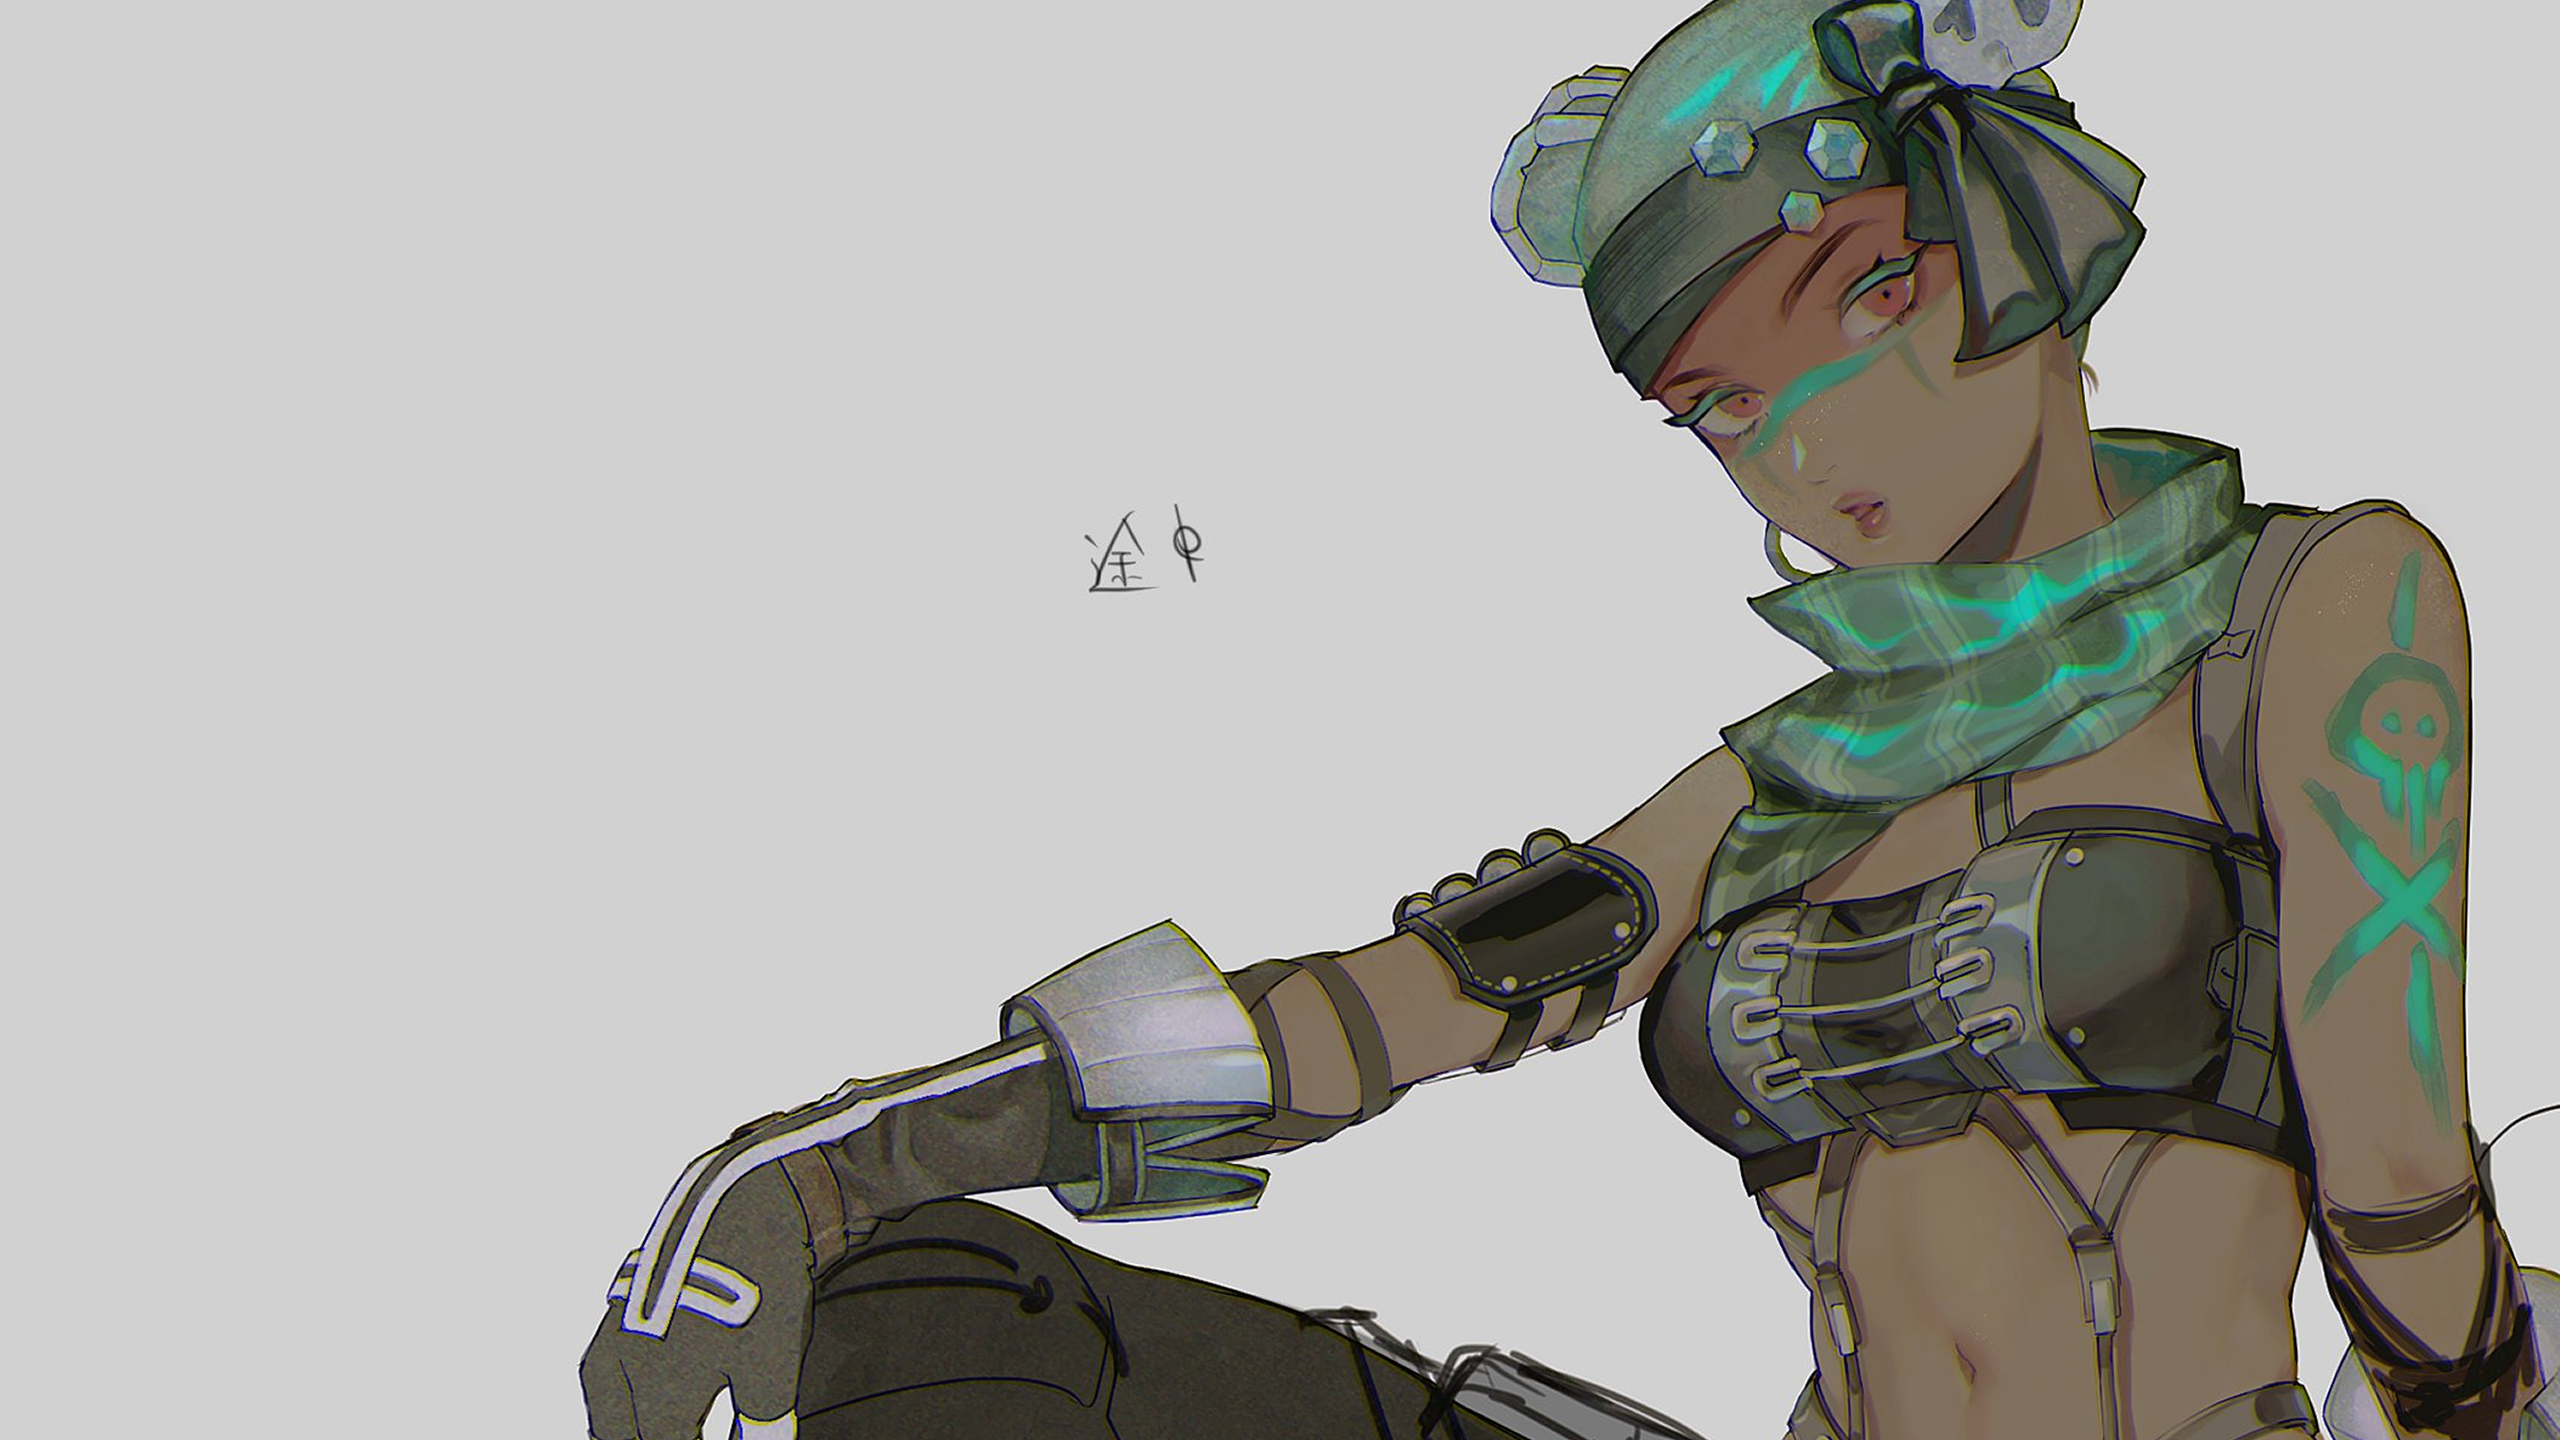 46411 Lifeline (Apex Legends) 4K, Lifeline (Apex Legends) - Rare Gallery HD  Wallpapers